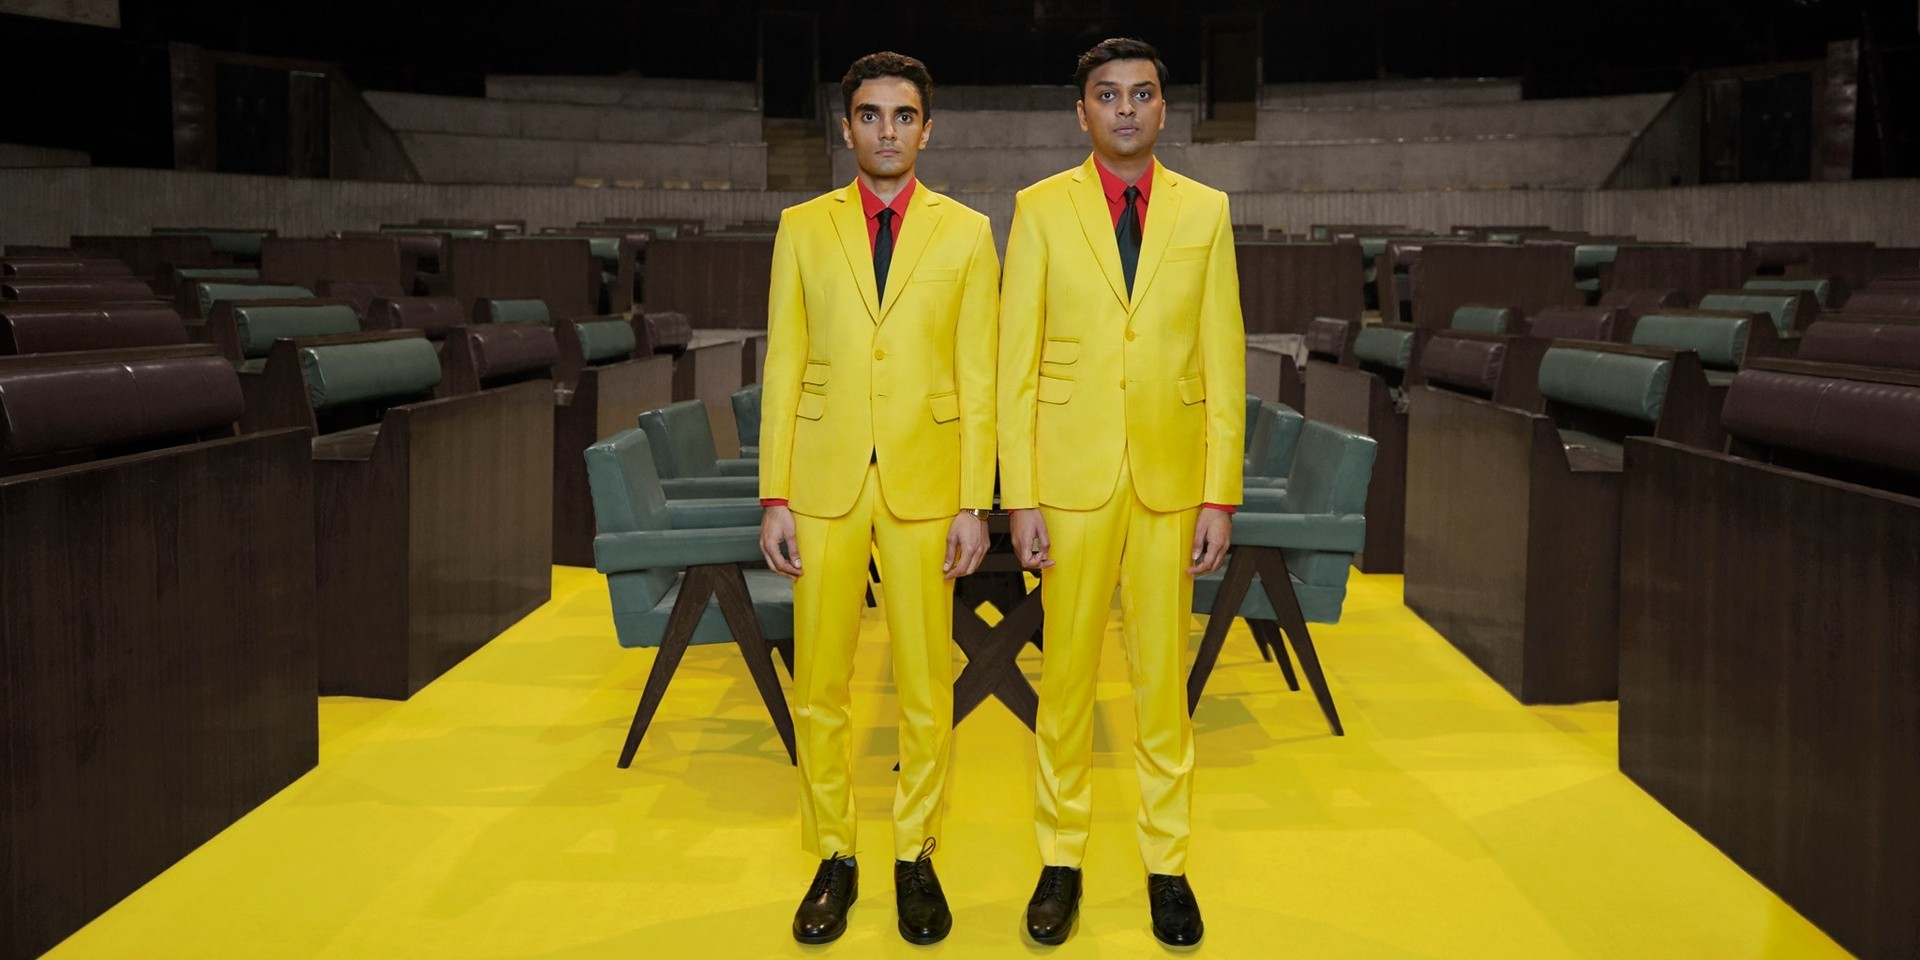 Parekh and Singh announce 'The Night Is Clear' tour